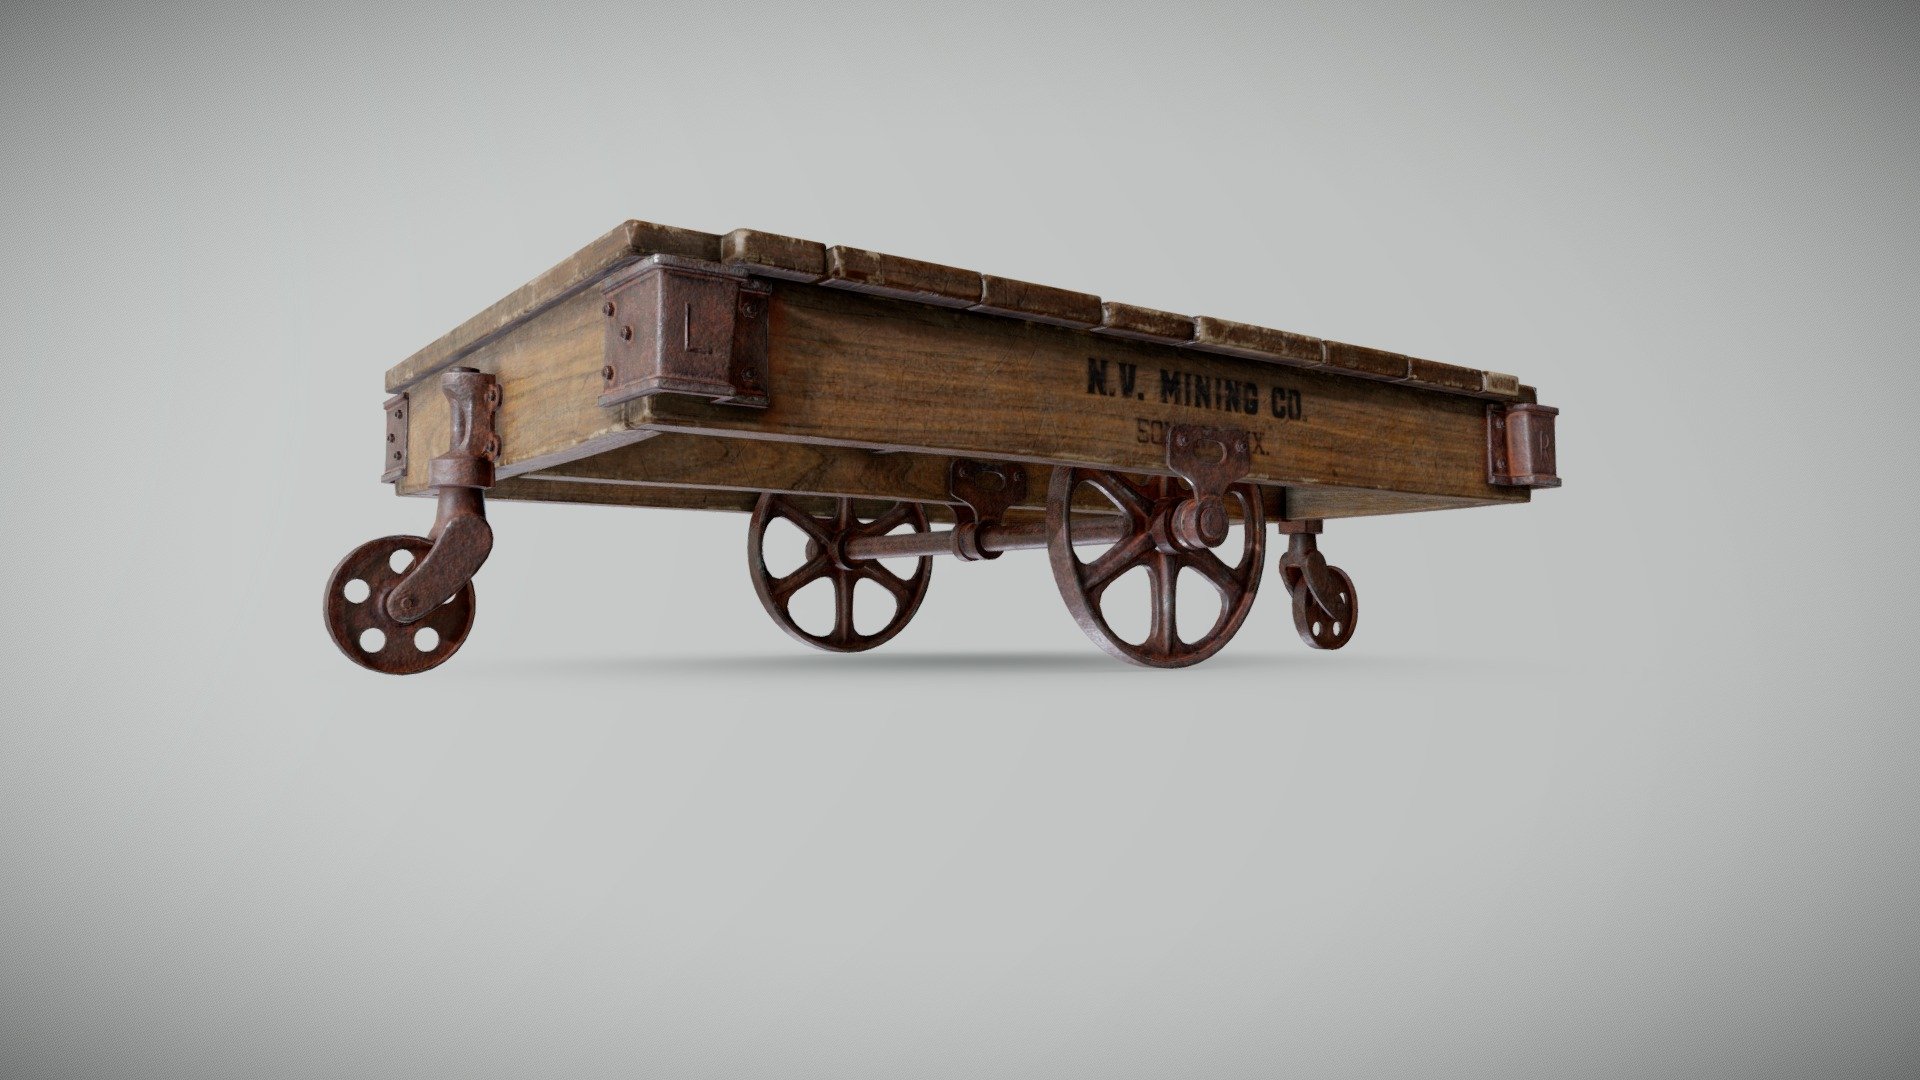 Mining Cart Coffee Table for industrial decor.

Materials:

Weathered Wood Planks with Rusted Steel.

You can request some variation of materials if necessary

GEOMETRY:

Medium Poly: 32,676 Faces(All Quads)/33,095 Verts/65,354 Tris.

Units: Meters

Correct real scale.

Dimensions: H0.35 x L1.48 x W0.834

PBR Workflow: Includes high quality maps 4k resolution.

Metallic-Roughness:




BaseColor

Metallic

Roughness

Normal

Height

Ambient Oclusion

Specular-Glossiness:




Diffuse

Reflection

Glossiness

Ior

Normal

Height
For Vray or Corona.

Formats:




.Blend(Native) Cycles and Eevee ready

.Obj

.Fbx

No lights included - Mining Cart Coffee Table - 3D model by NoelVillalobos 3d model